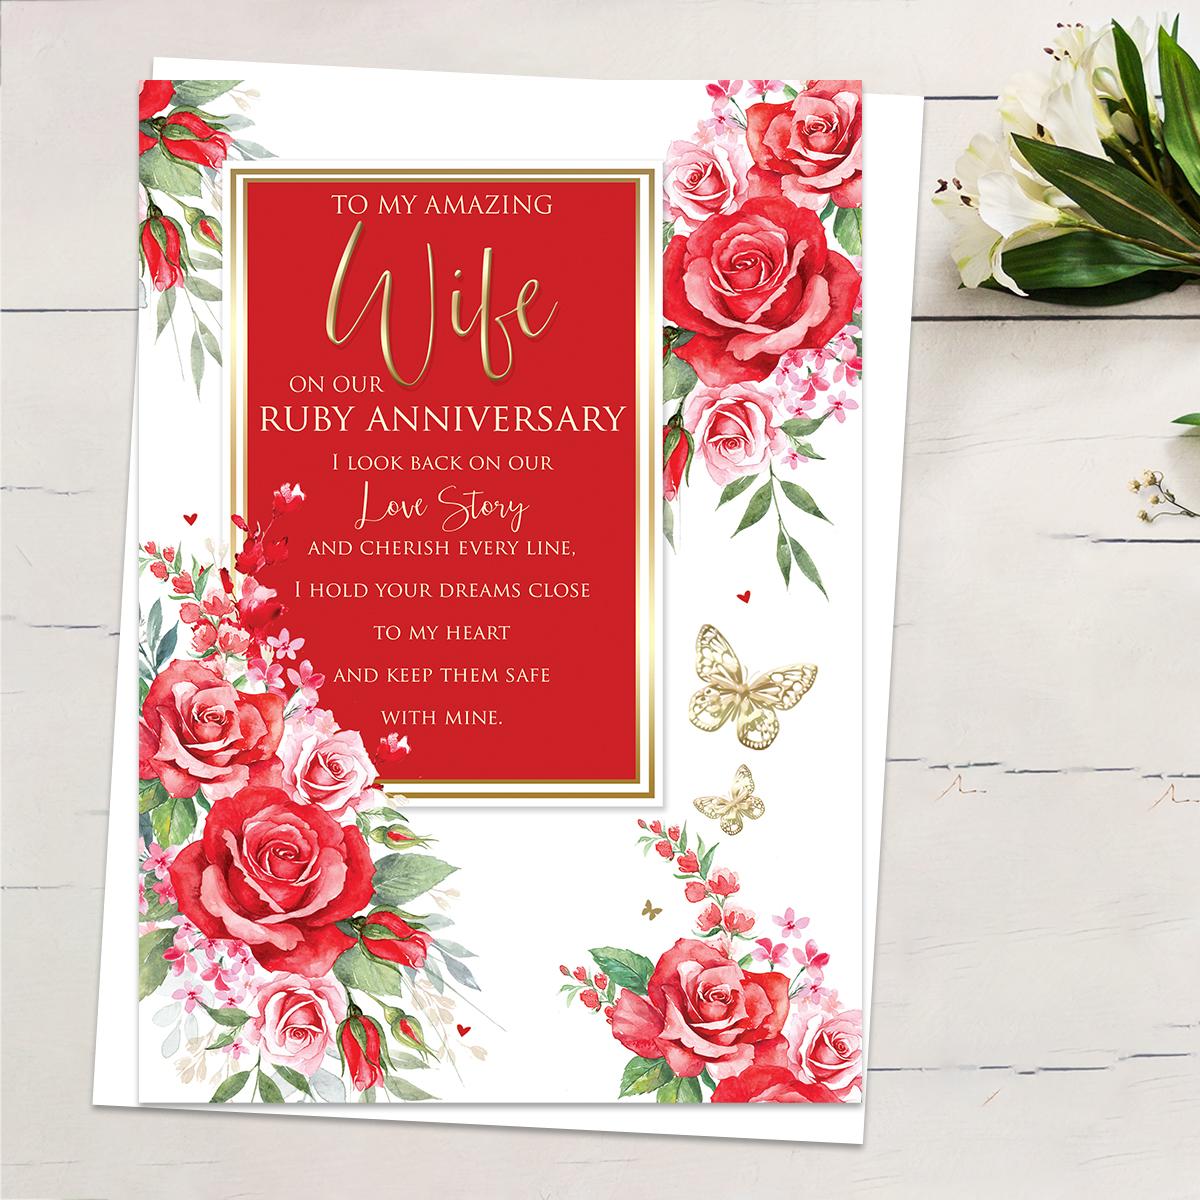 ' To My Amazing Wife On Our Ruby Anniversary' Featuring Red /Pink Roses With Heartfelt Words And Gold Foiled Detail. Complete With White Envelope